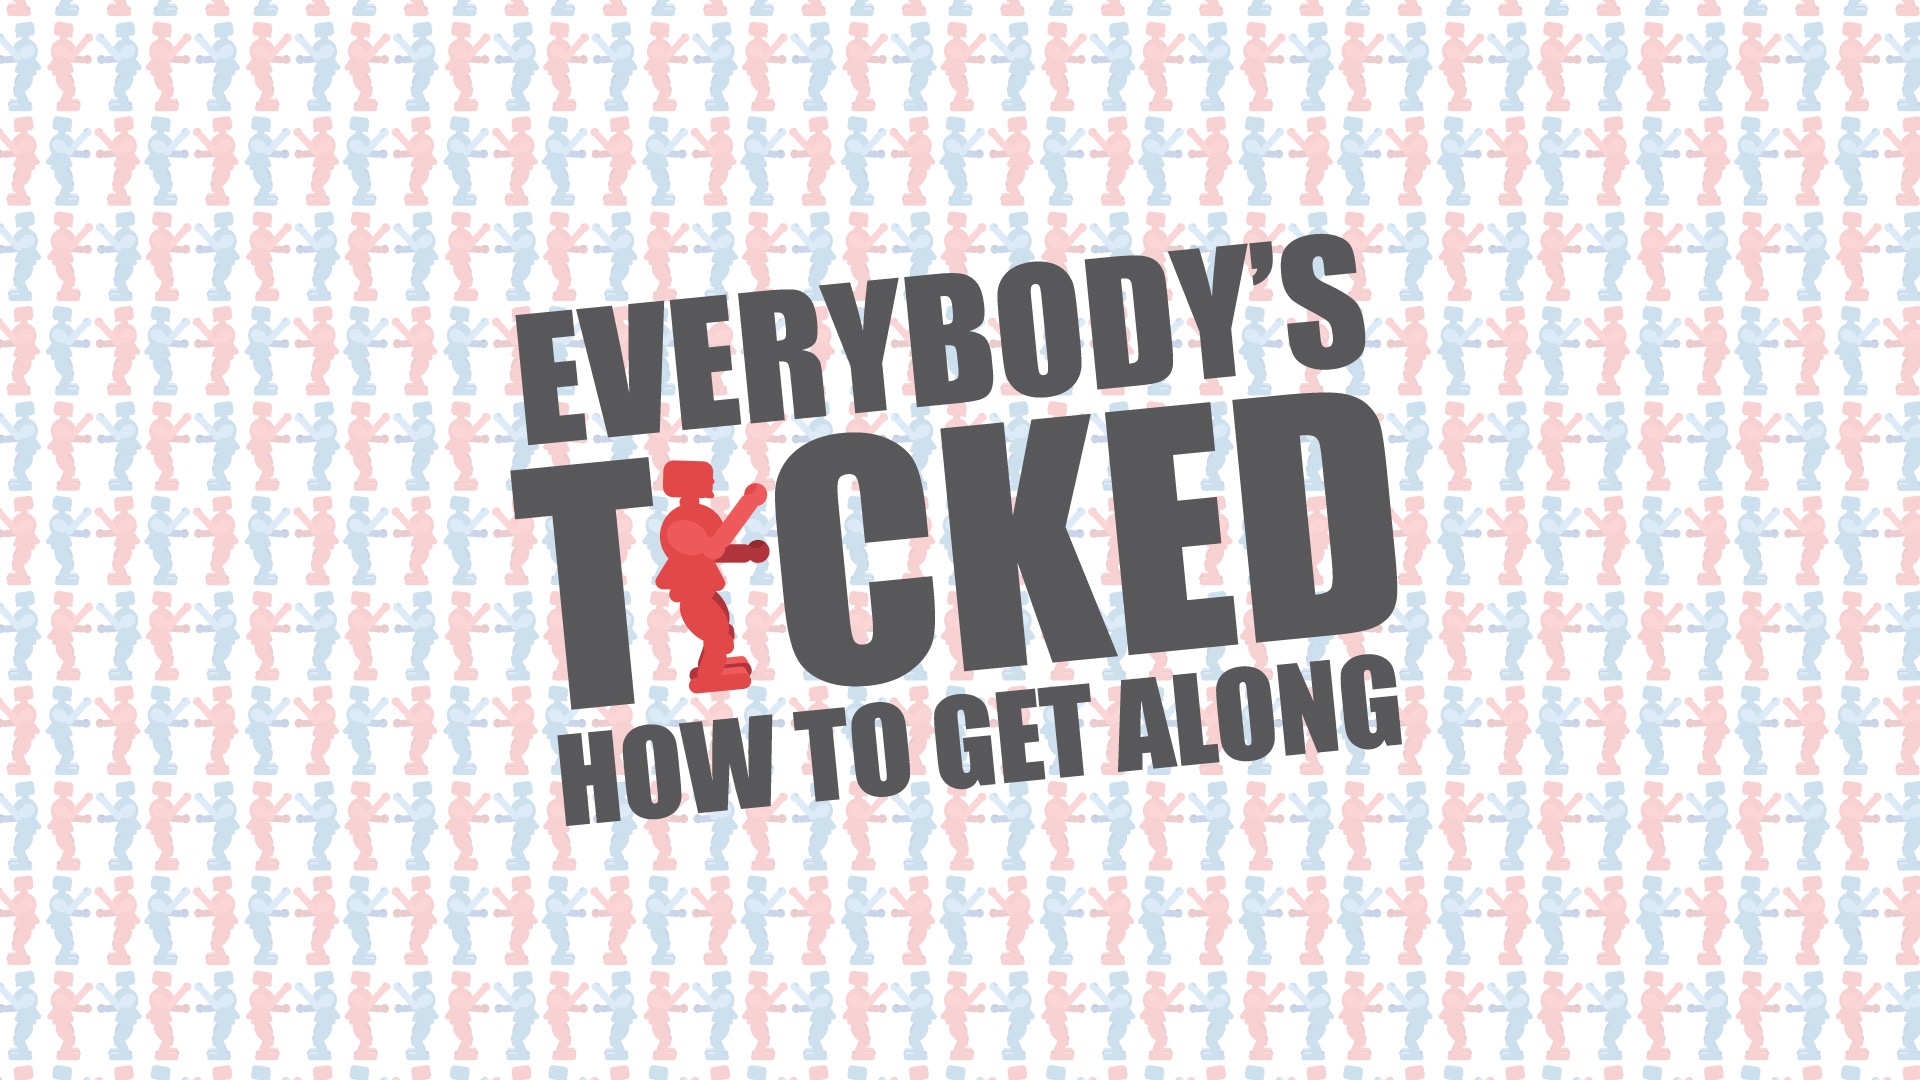 Everybody's Ticked: How To Get Along - Part IX